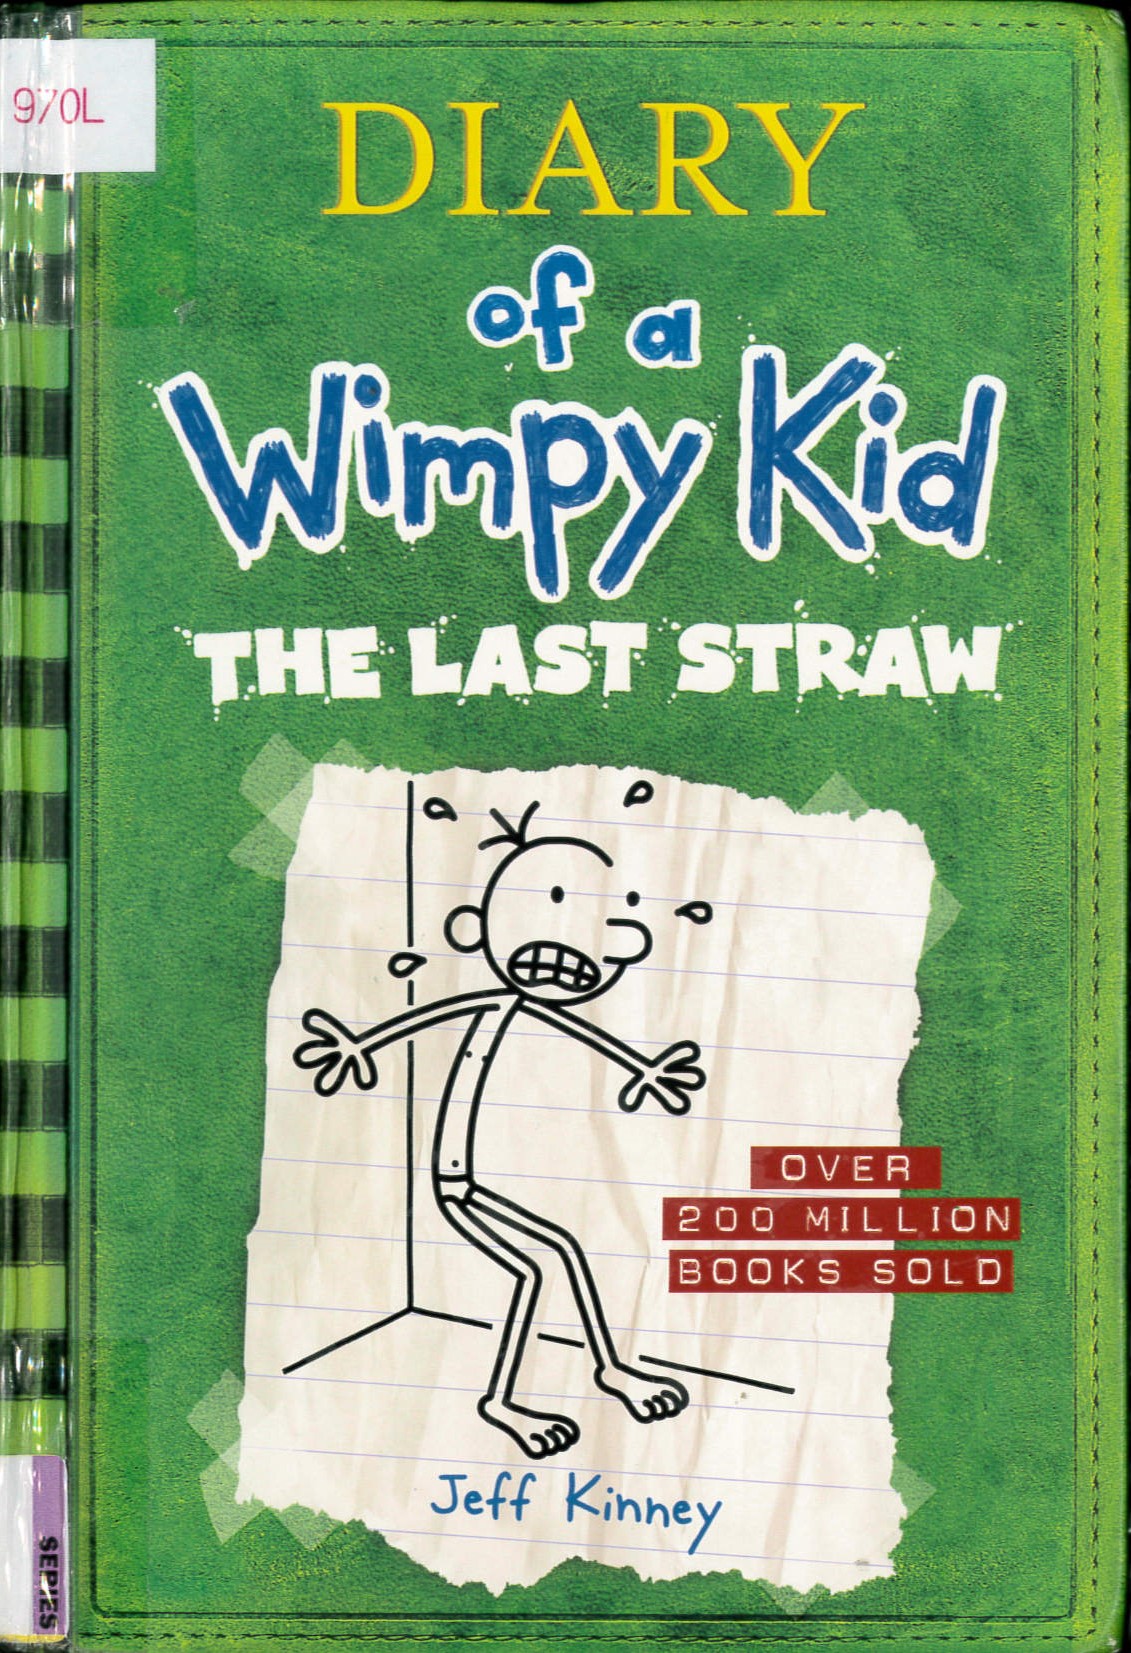 Diary of a wimpy kid(3) : the last straw /